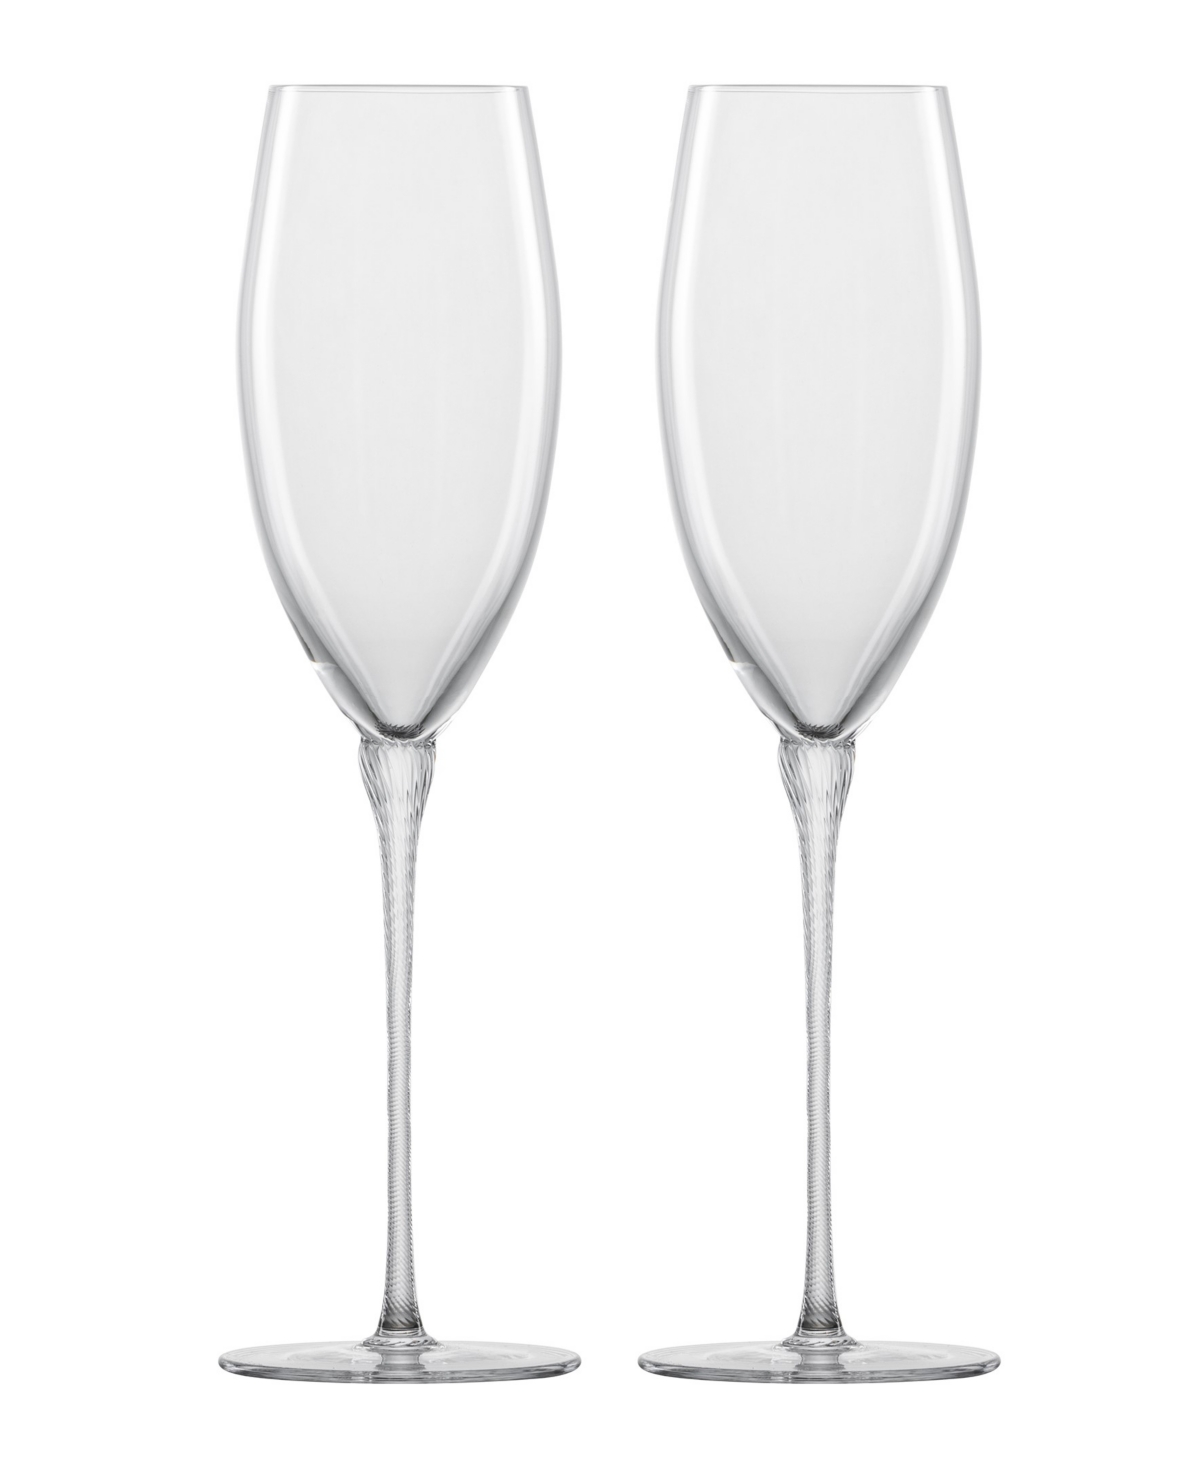 Zwiesel Glas Handmade Highness Champagne 8.45 Oz, Set Of 2 In Clear